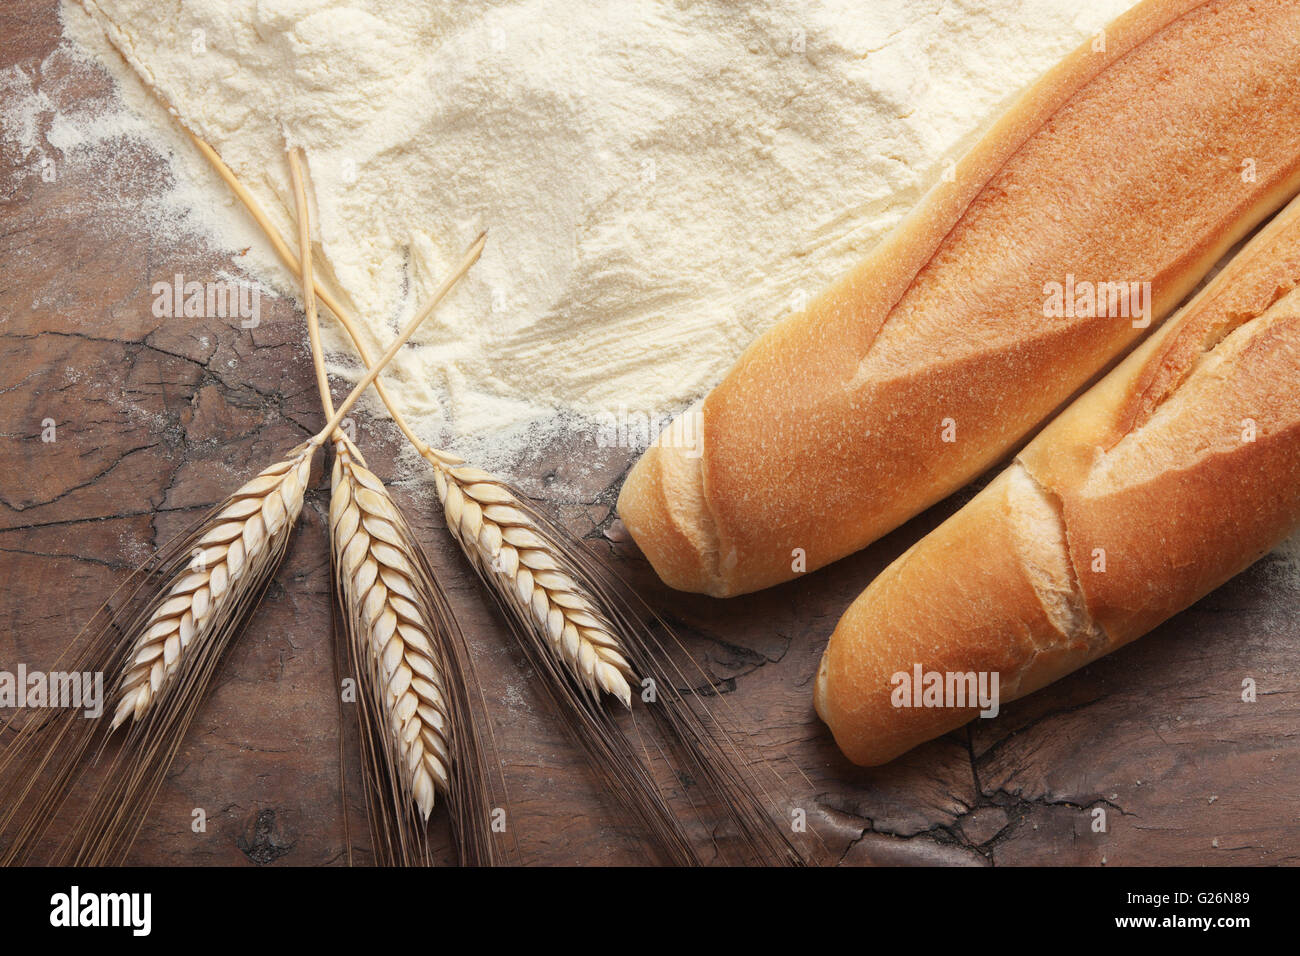 Bread, flour and wheat on a wooden table Stock Photo